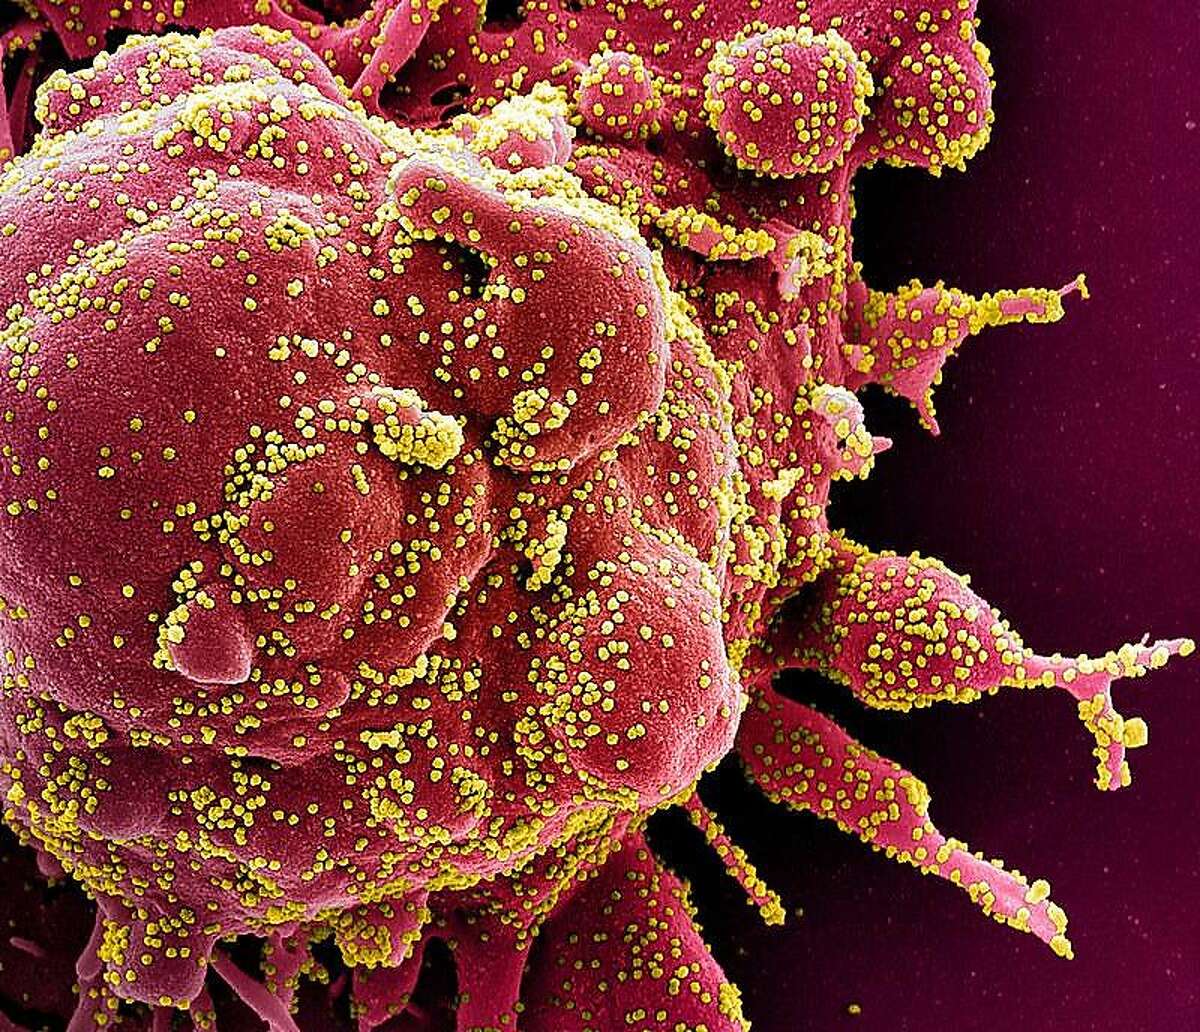 This handout image obtained on April 29, 2020 and released by the National Institute of Allergy and Infectious Diseases (NIAID) of the National Institutes of Health (NIH), shows a colorized scanning electron micrograph of an apoptotic cell (red) heavily infected with SARS-COV-2 virus particles (yellow), isolated from a patient sample captured at the NIAID Integrated Research Facility (IRF) in Fort Detrick, Maryland. - The US intelligence community said Thursday it had concluded that the novel coronavirus that has swept the globe originated in China but was not man-made or engineered. (Photo by Handout / National Institute of Allergy and Infectious Diseases / AFP) / RESTRICTED TO EDITORIAL USE - MANDATORY CREDIT "AFP PHOTO / NATIONAL INSTITUTE OF ALLERGY AND INFECTIOUS DISEASES, NIH " - NO MARKETING - NO ADVERTISING CAMPAIGNS - DISTRIBUTED AS A SERVICE TO CLIENTS (Photo by HANDOUT/National Institute of Allergy an/AFP via Getty Images)